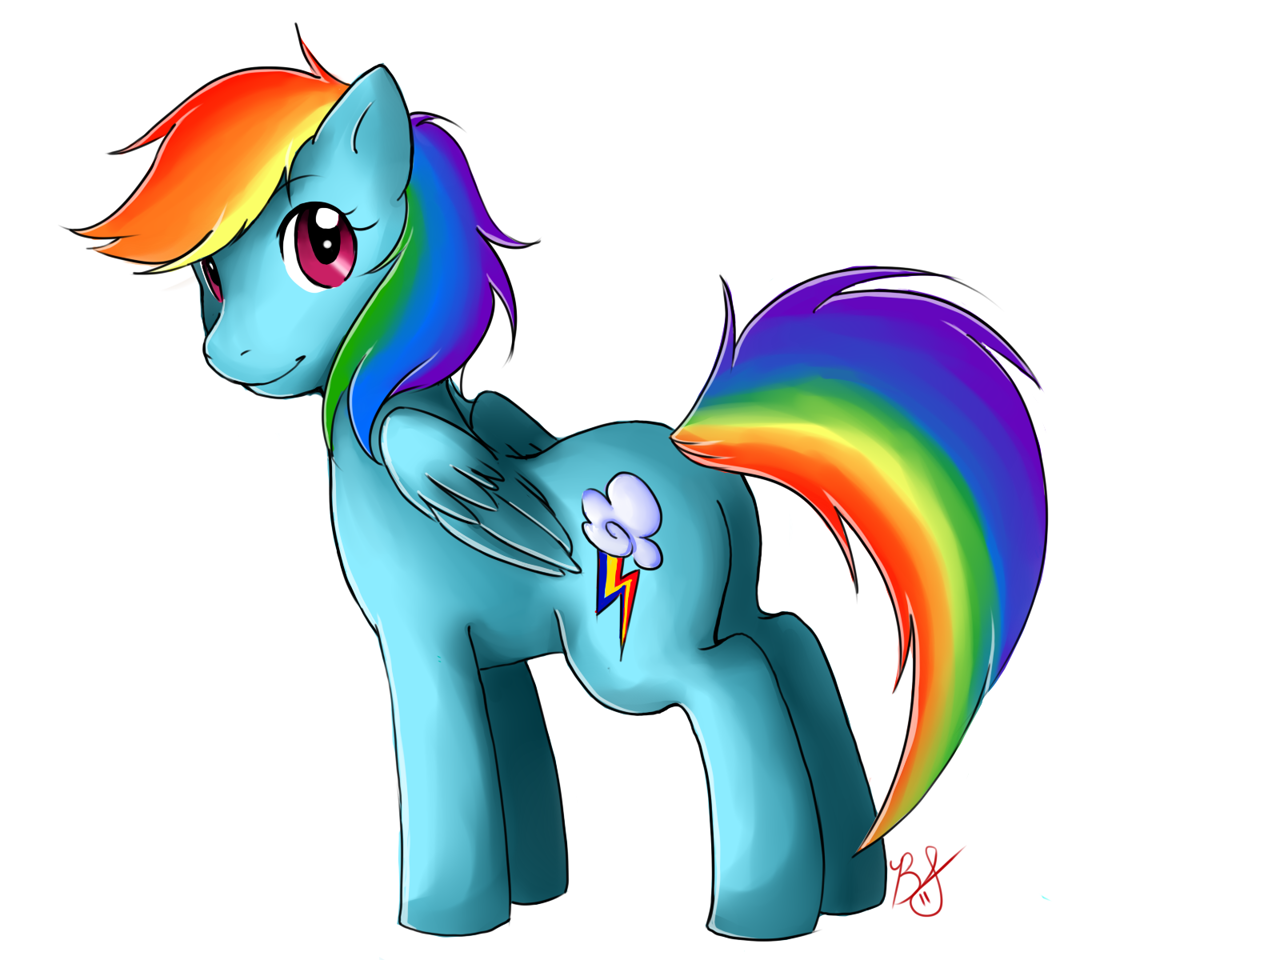 Dashie without a hat